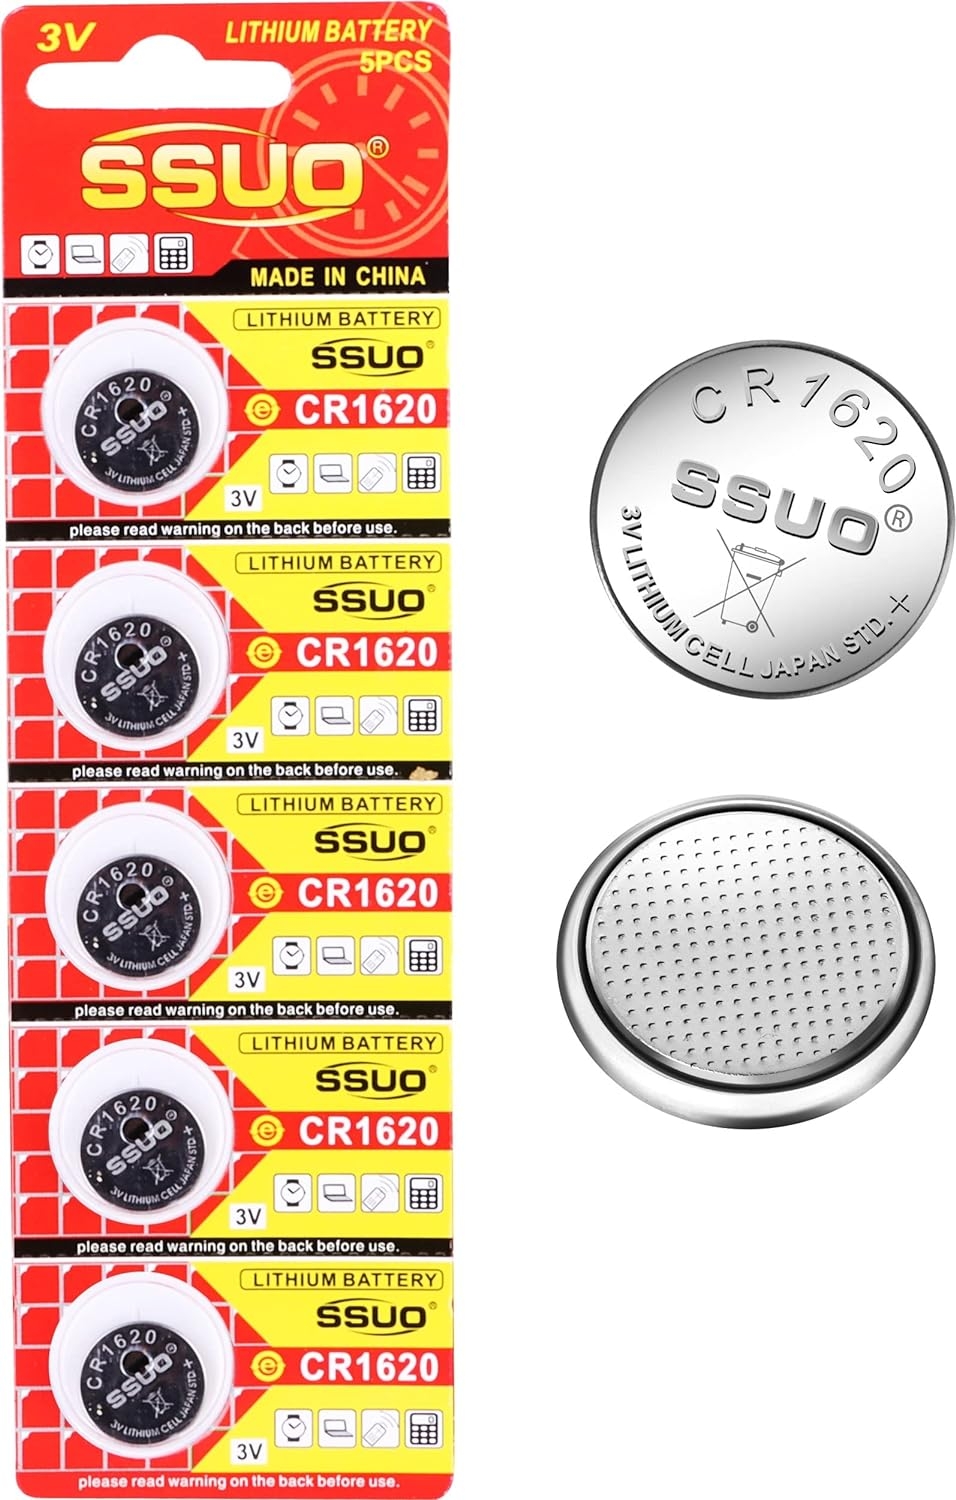 SSUO CR-1620 Lithium Coin Battery 3v - 5 pcs | Provide Long Lasting Power from keyless-Entry fobs to Toys